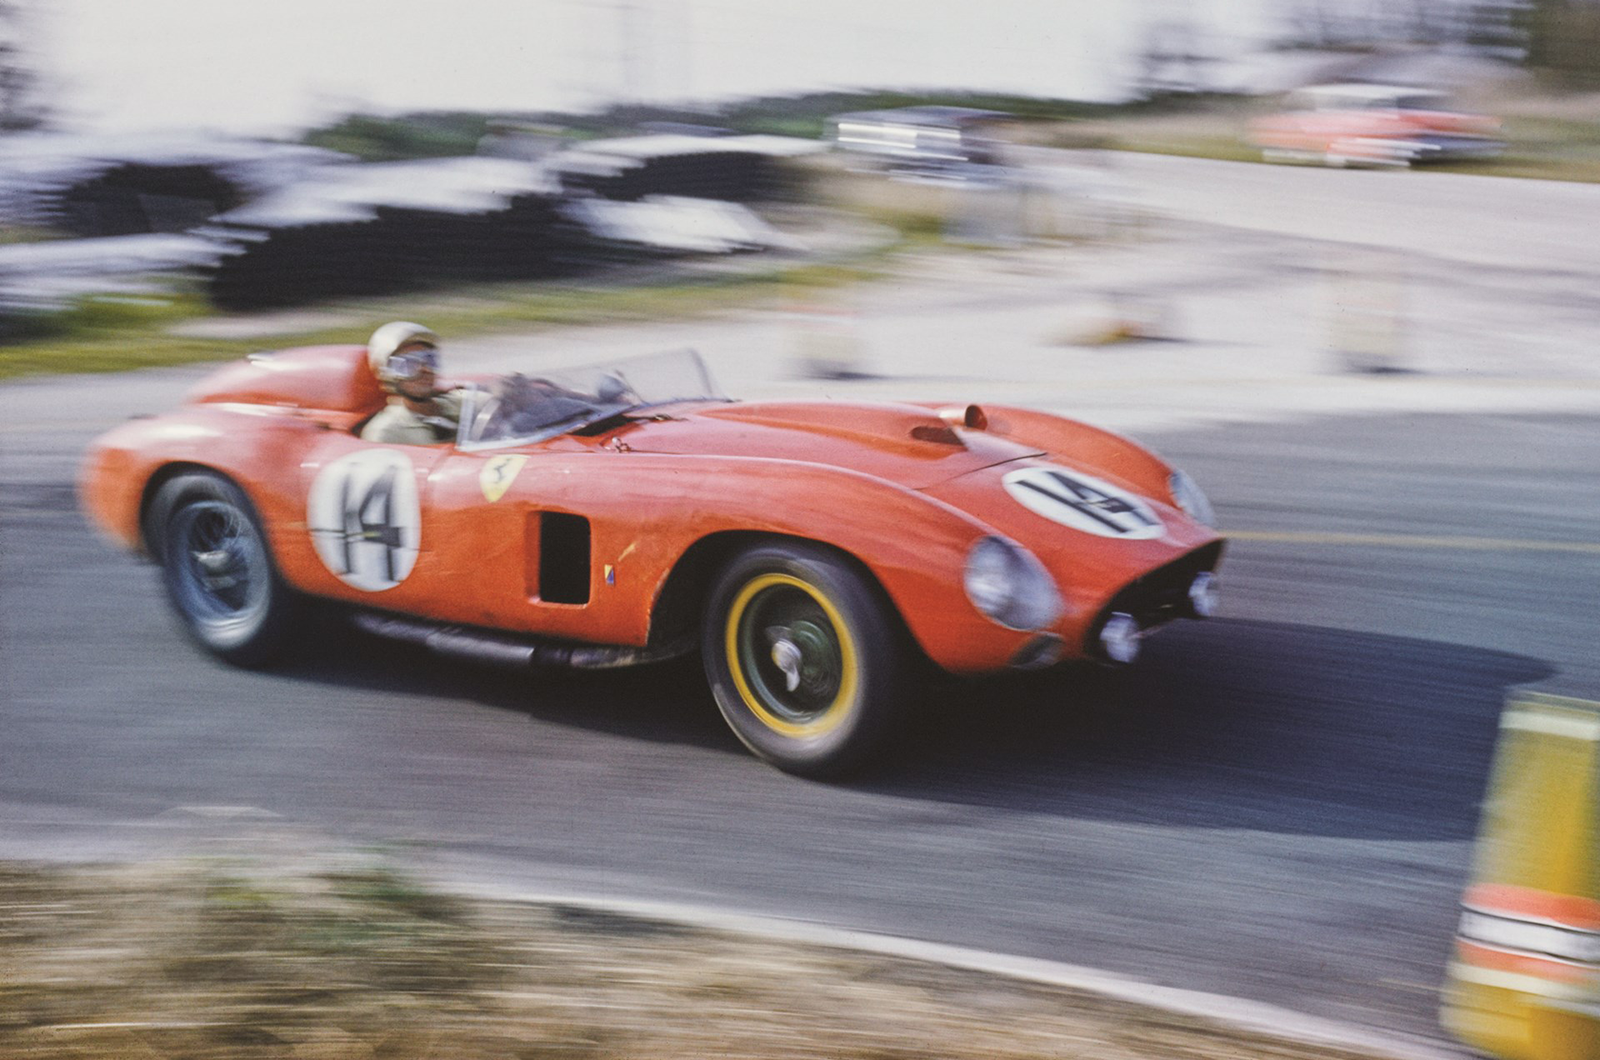 Classic & Sports Car – Yours for £20m: Ferrari 290 MM raced by Fangio and Moss